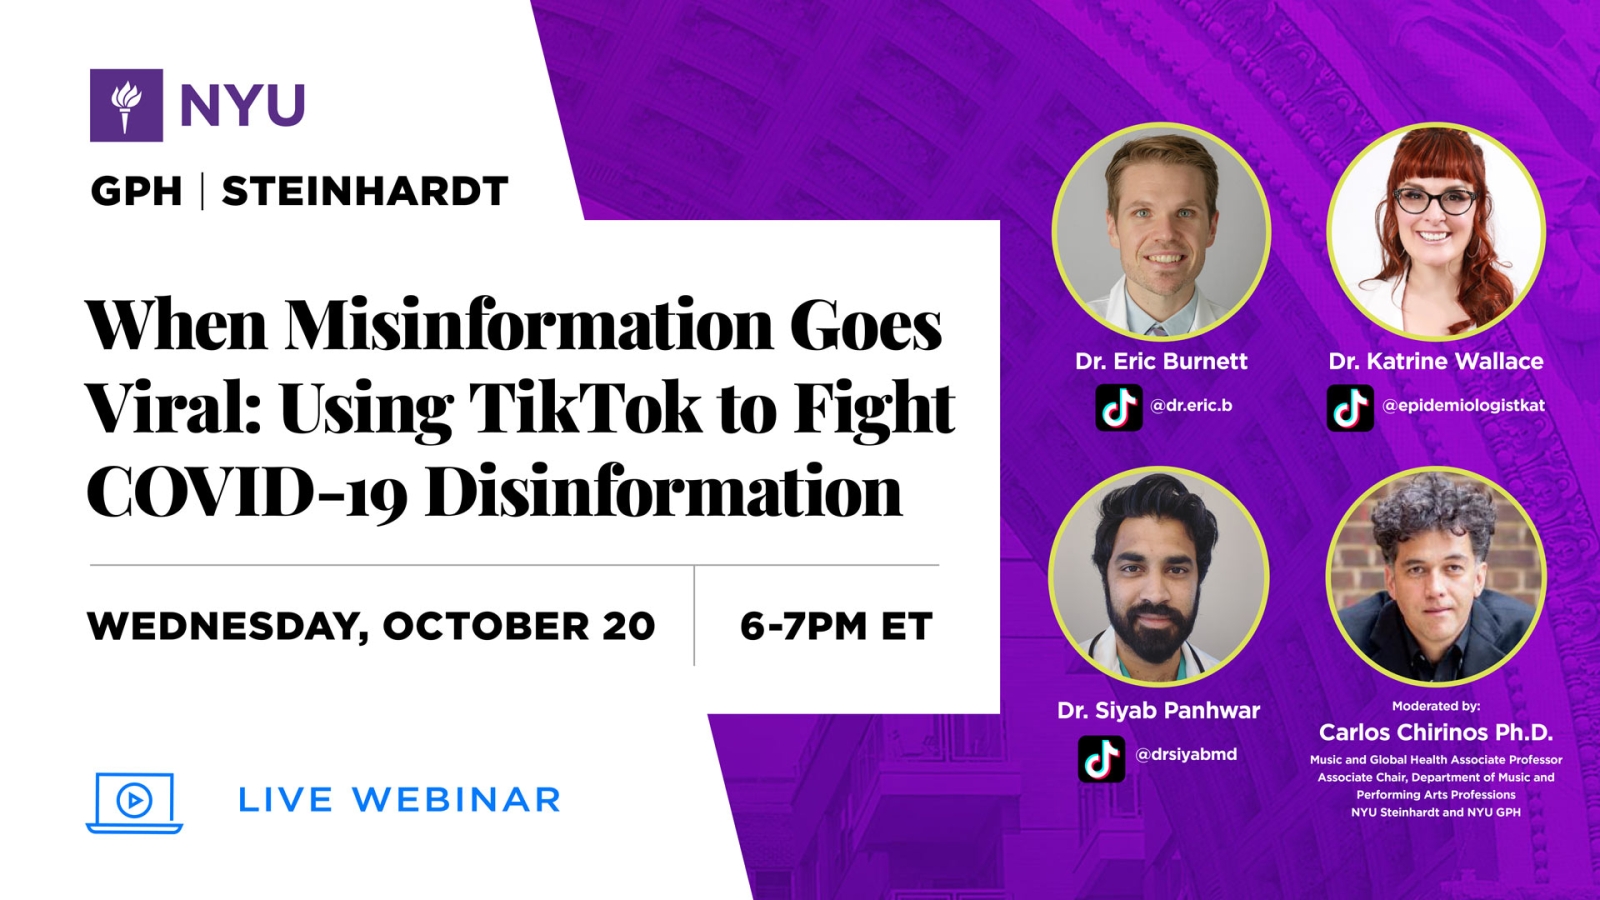 When Misinformation Goes Viral: Using TikTok to Fight COVID-19 Disinformation